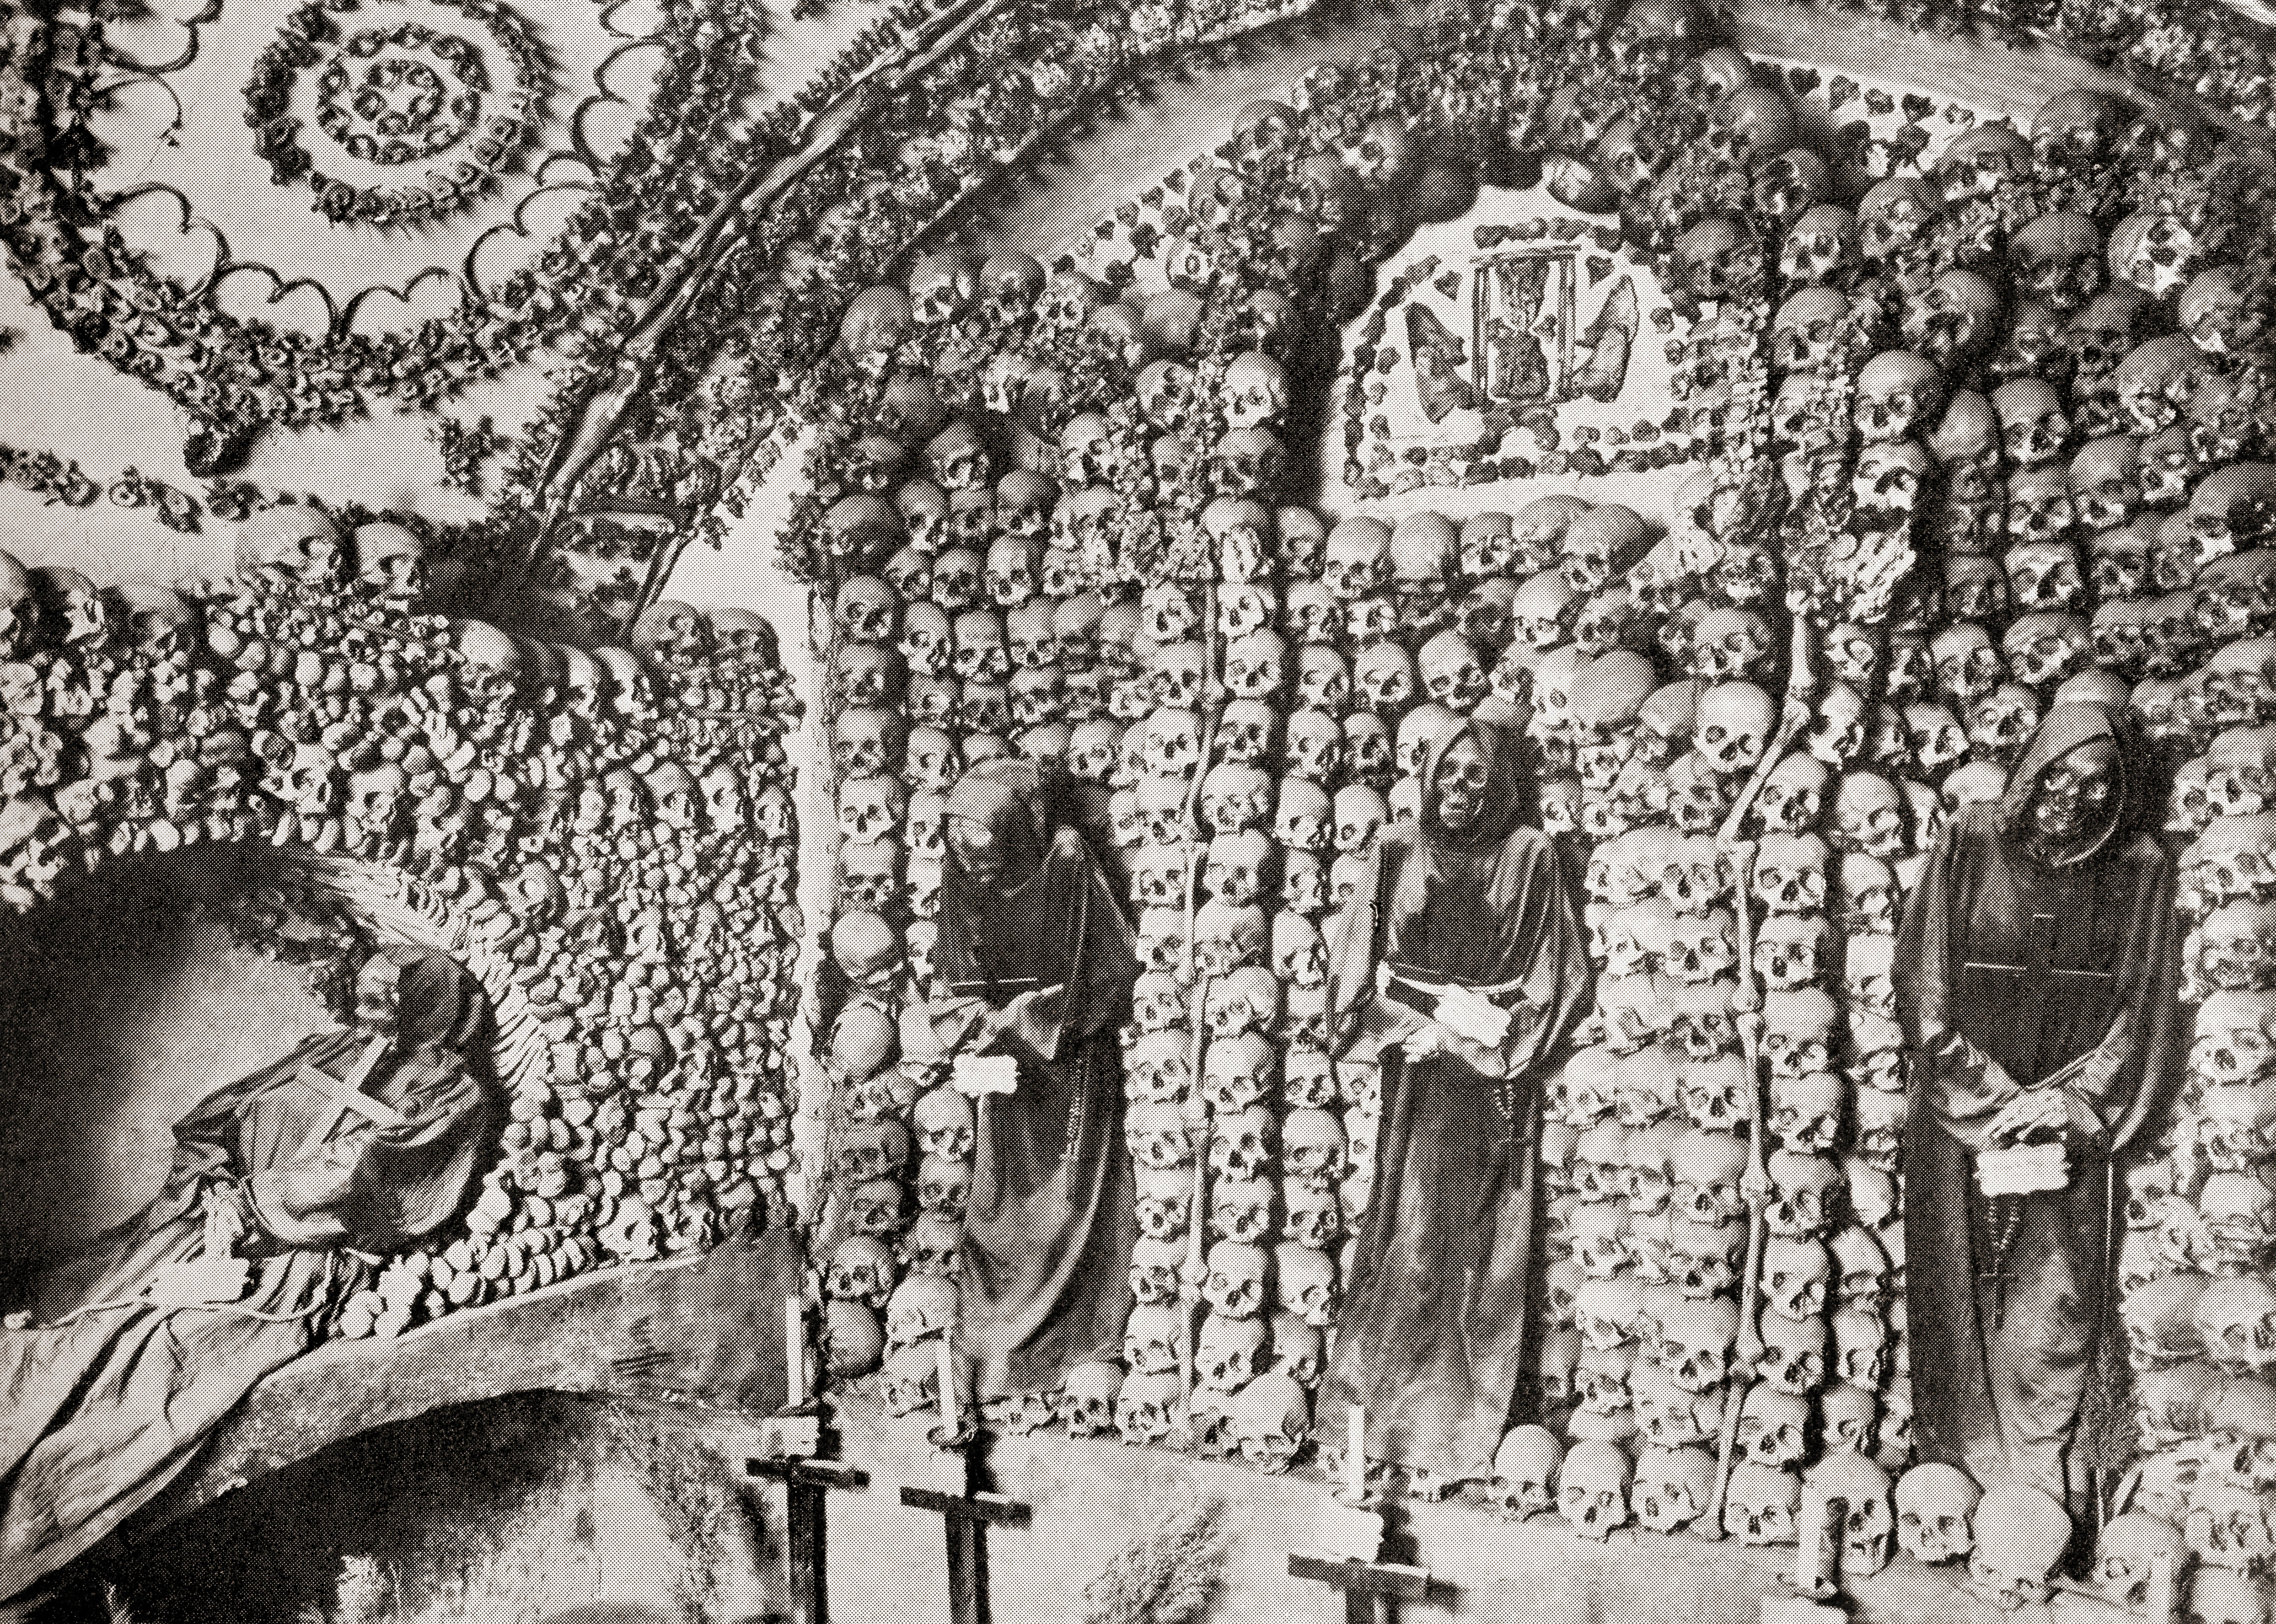 The Capuchin Crypt, a small space comprising several tiny chapels located beneath the church of Santa Maria della Concezione dei Cappuccini on the Via Veneto, Rome, Italy, lined with the skeletal remains of 3,700 bodies believed to be Capuchin friars. Fr